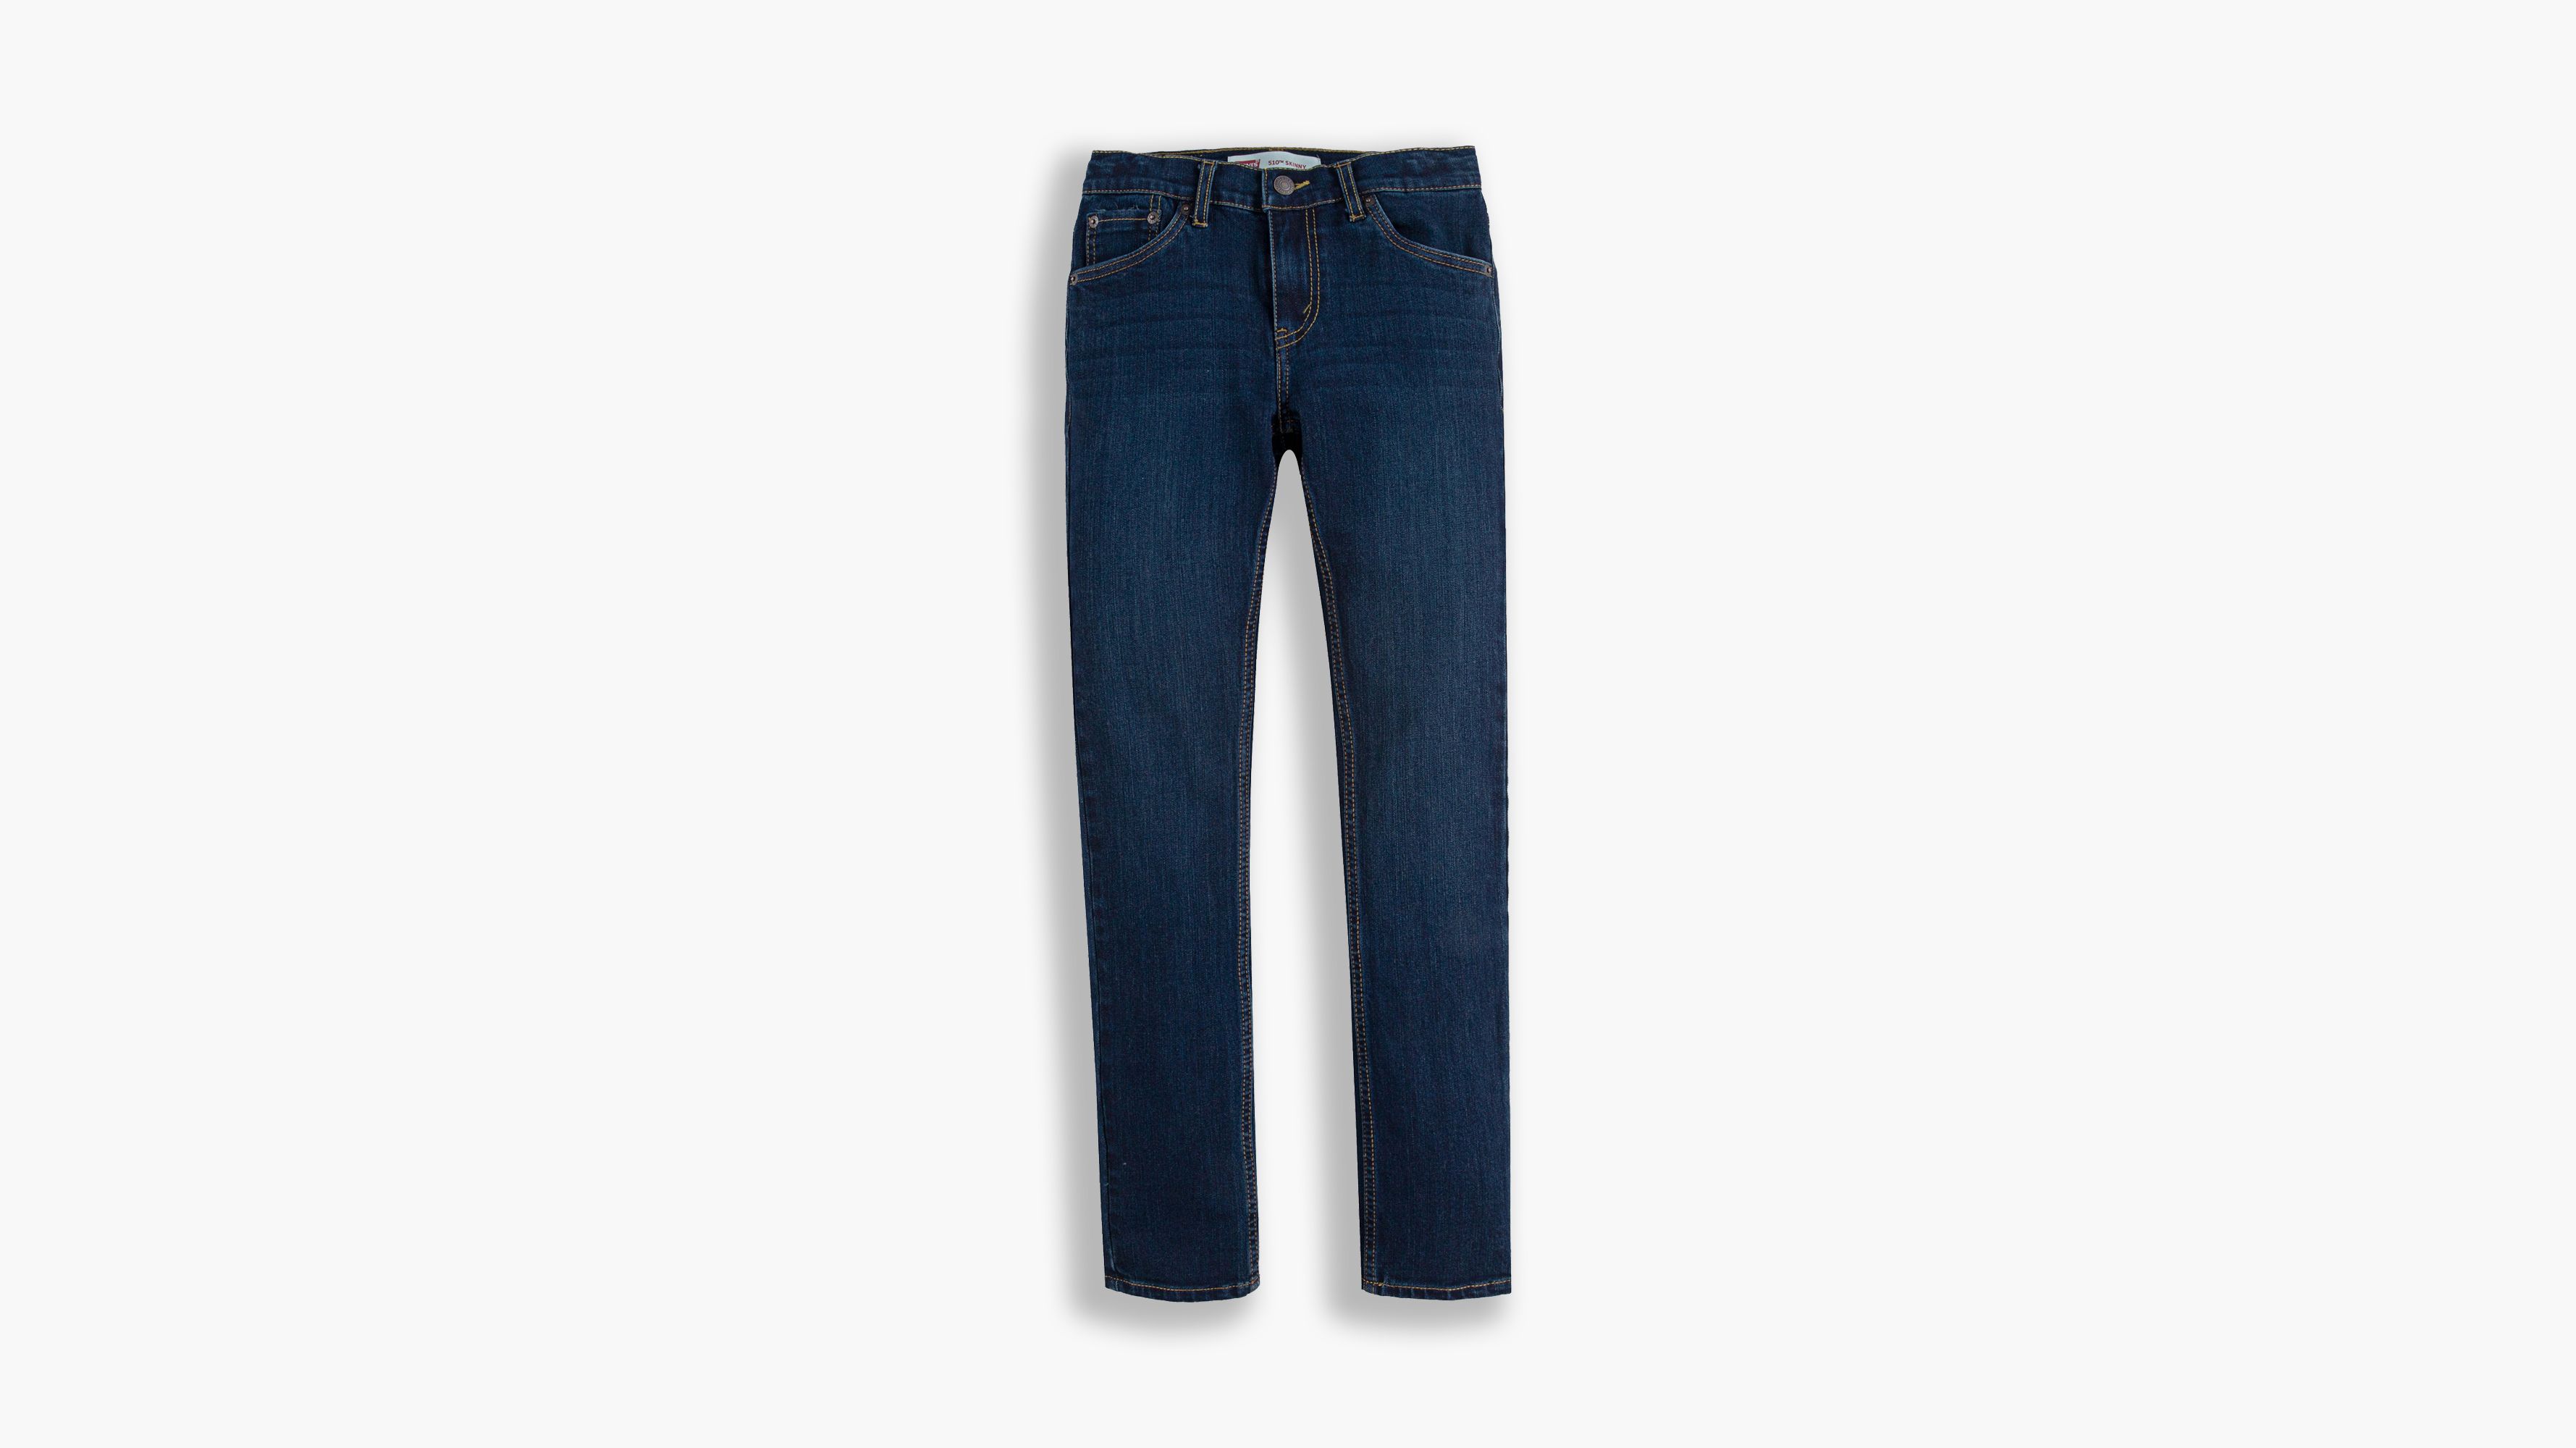 levis girl jeans price